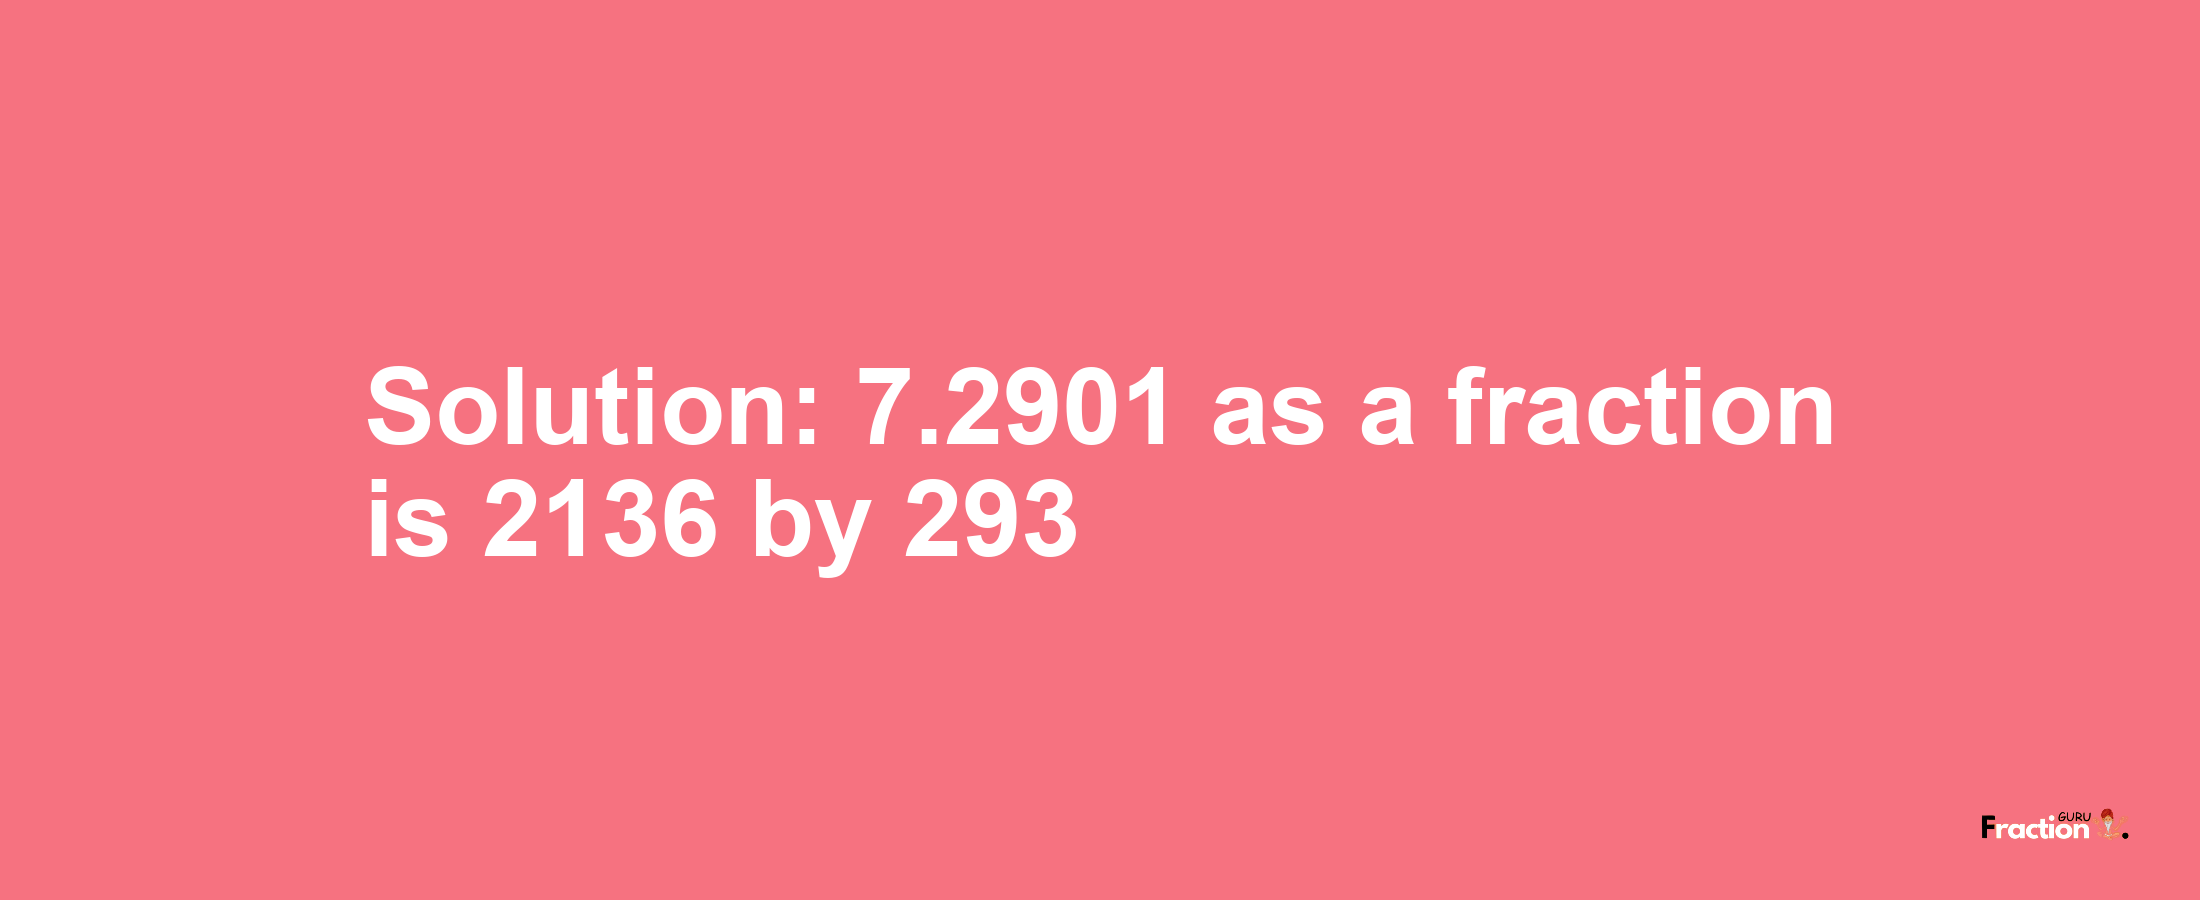 Solution:7.2901 as a fraction is 2136/293